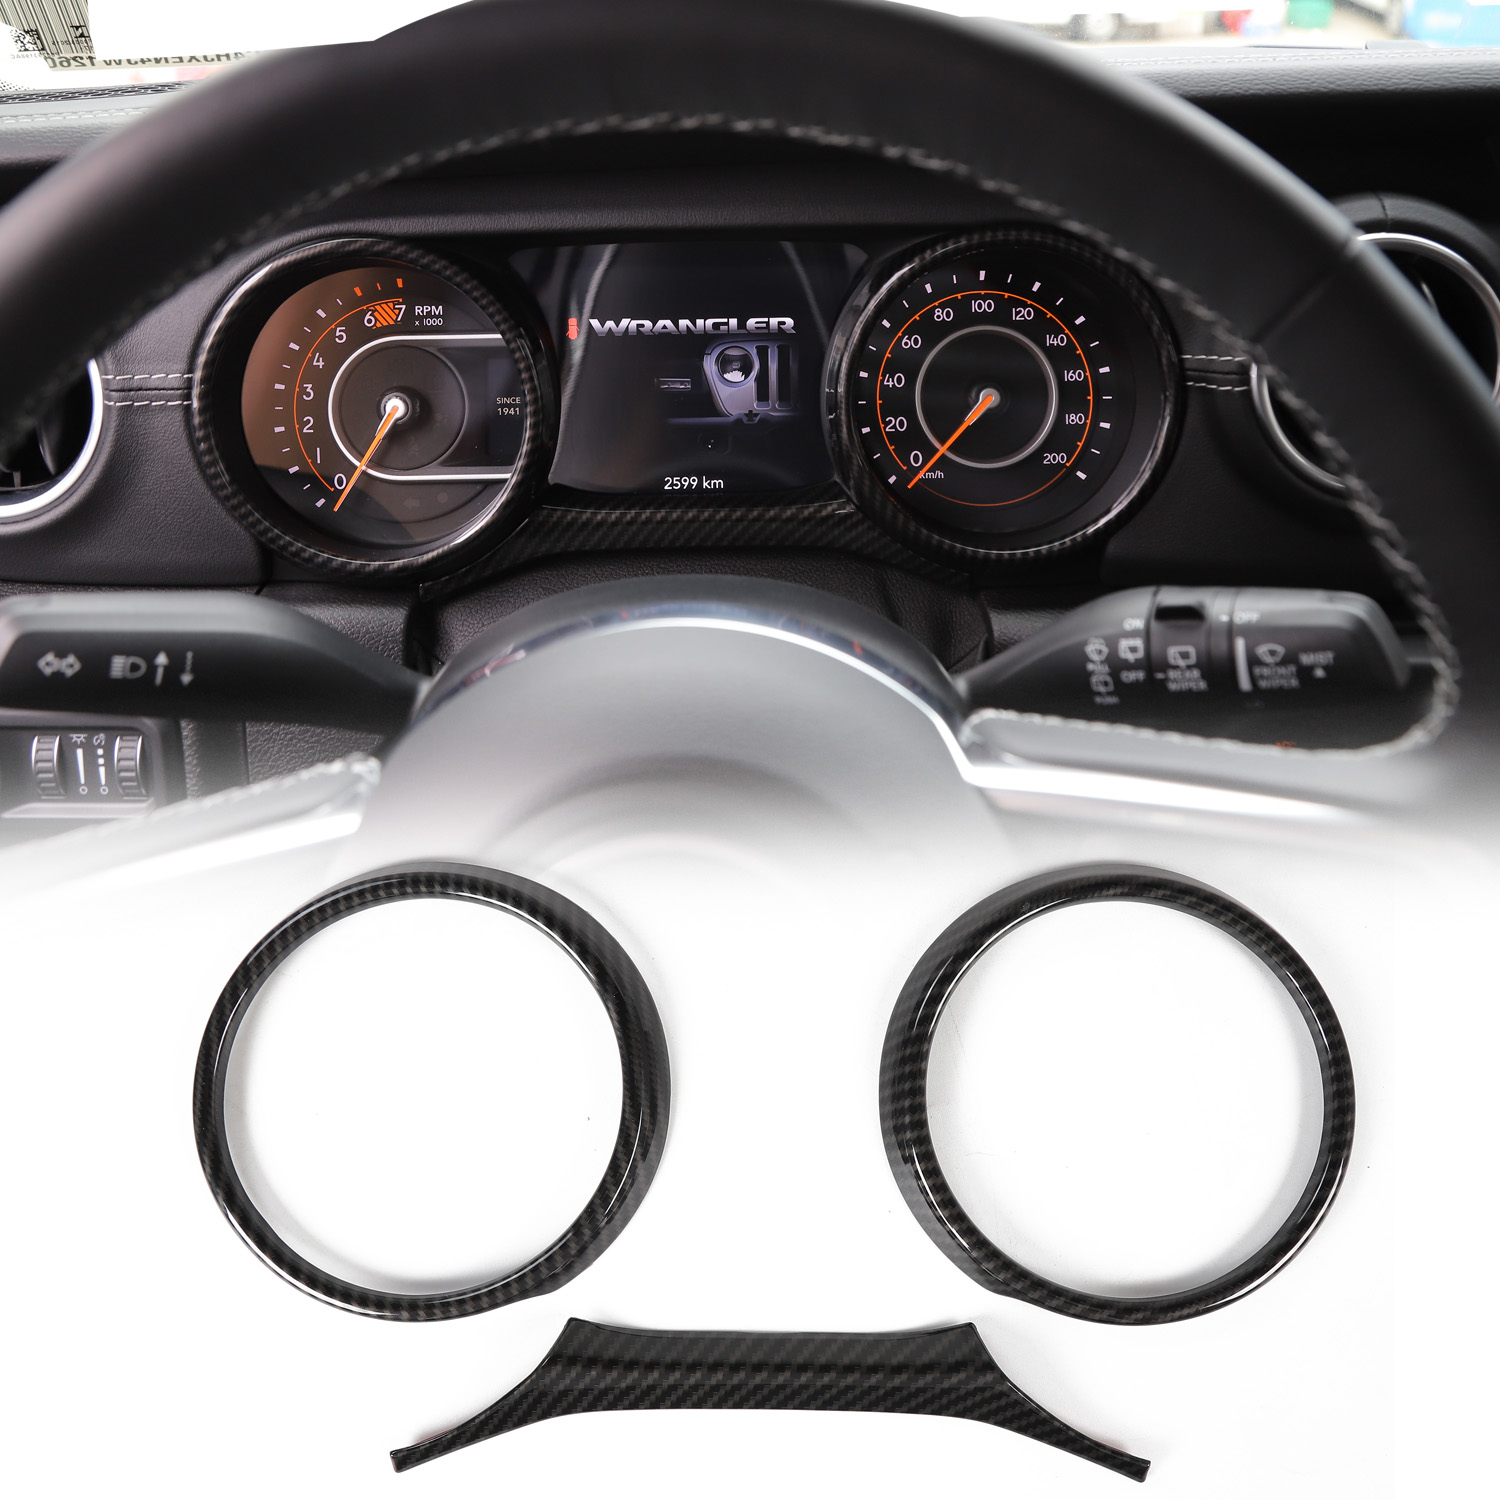 

ABS Dashboard Decoratibe Circle Carbon Fiber Cover For Jeep Wrangler JL 2018+ High Quality Auto Exterior Accessories